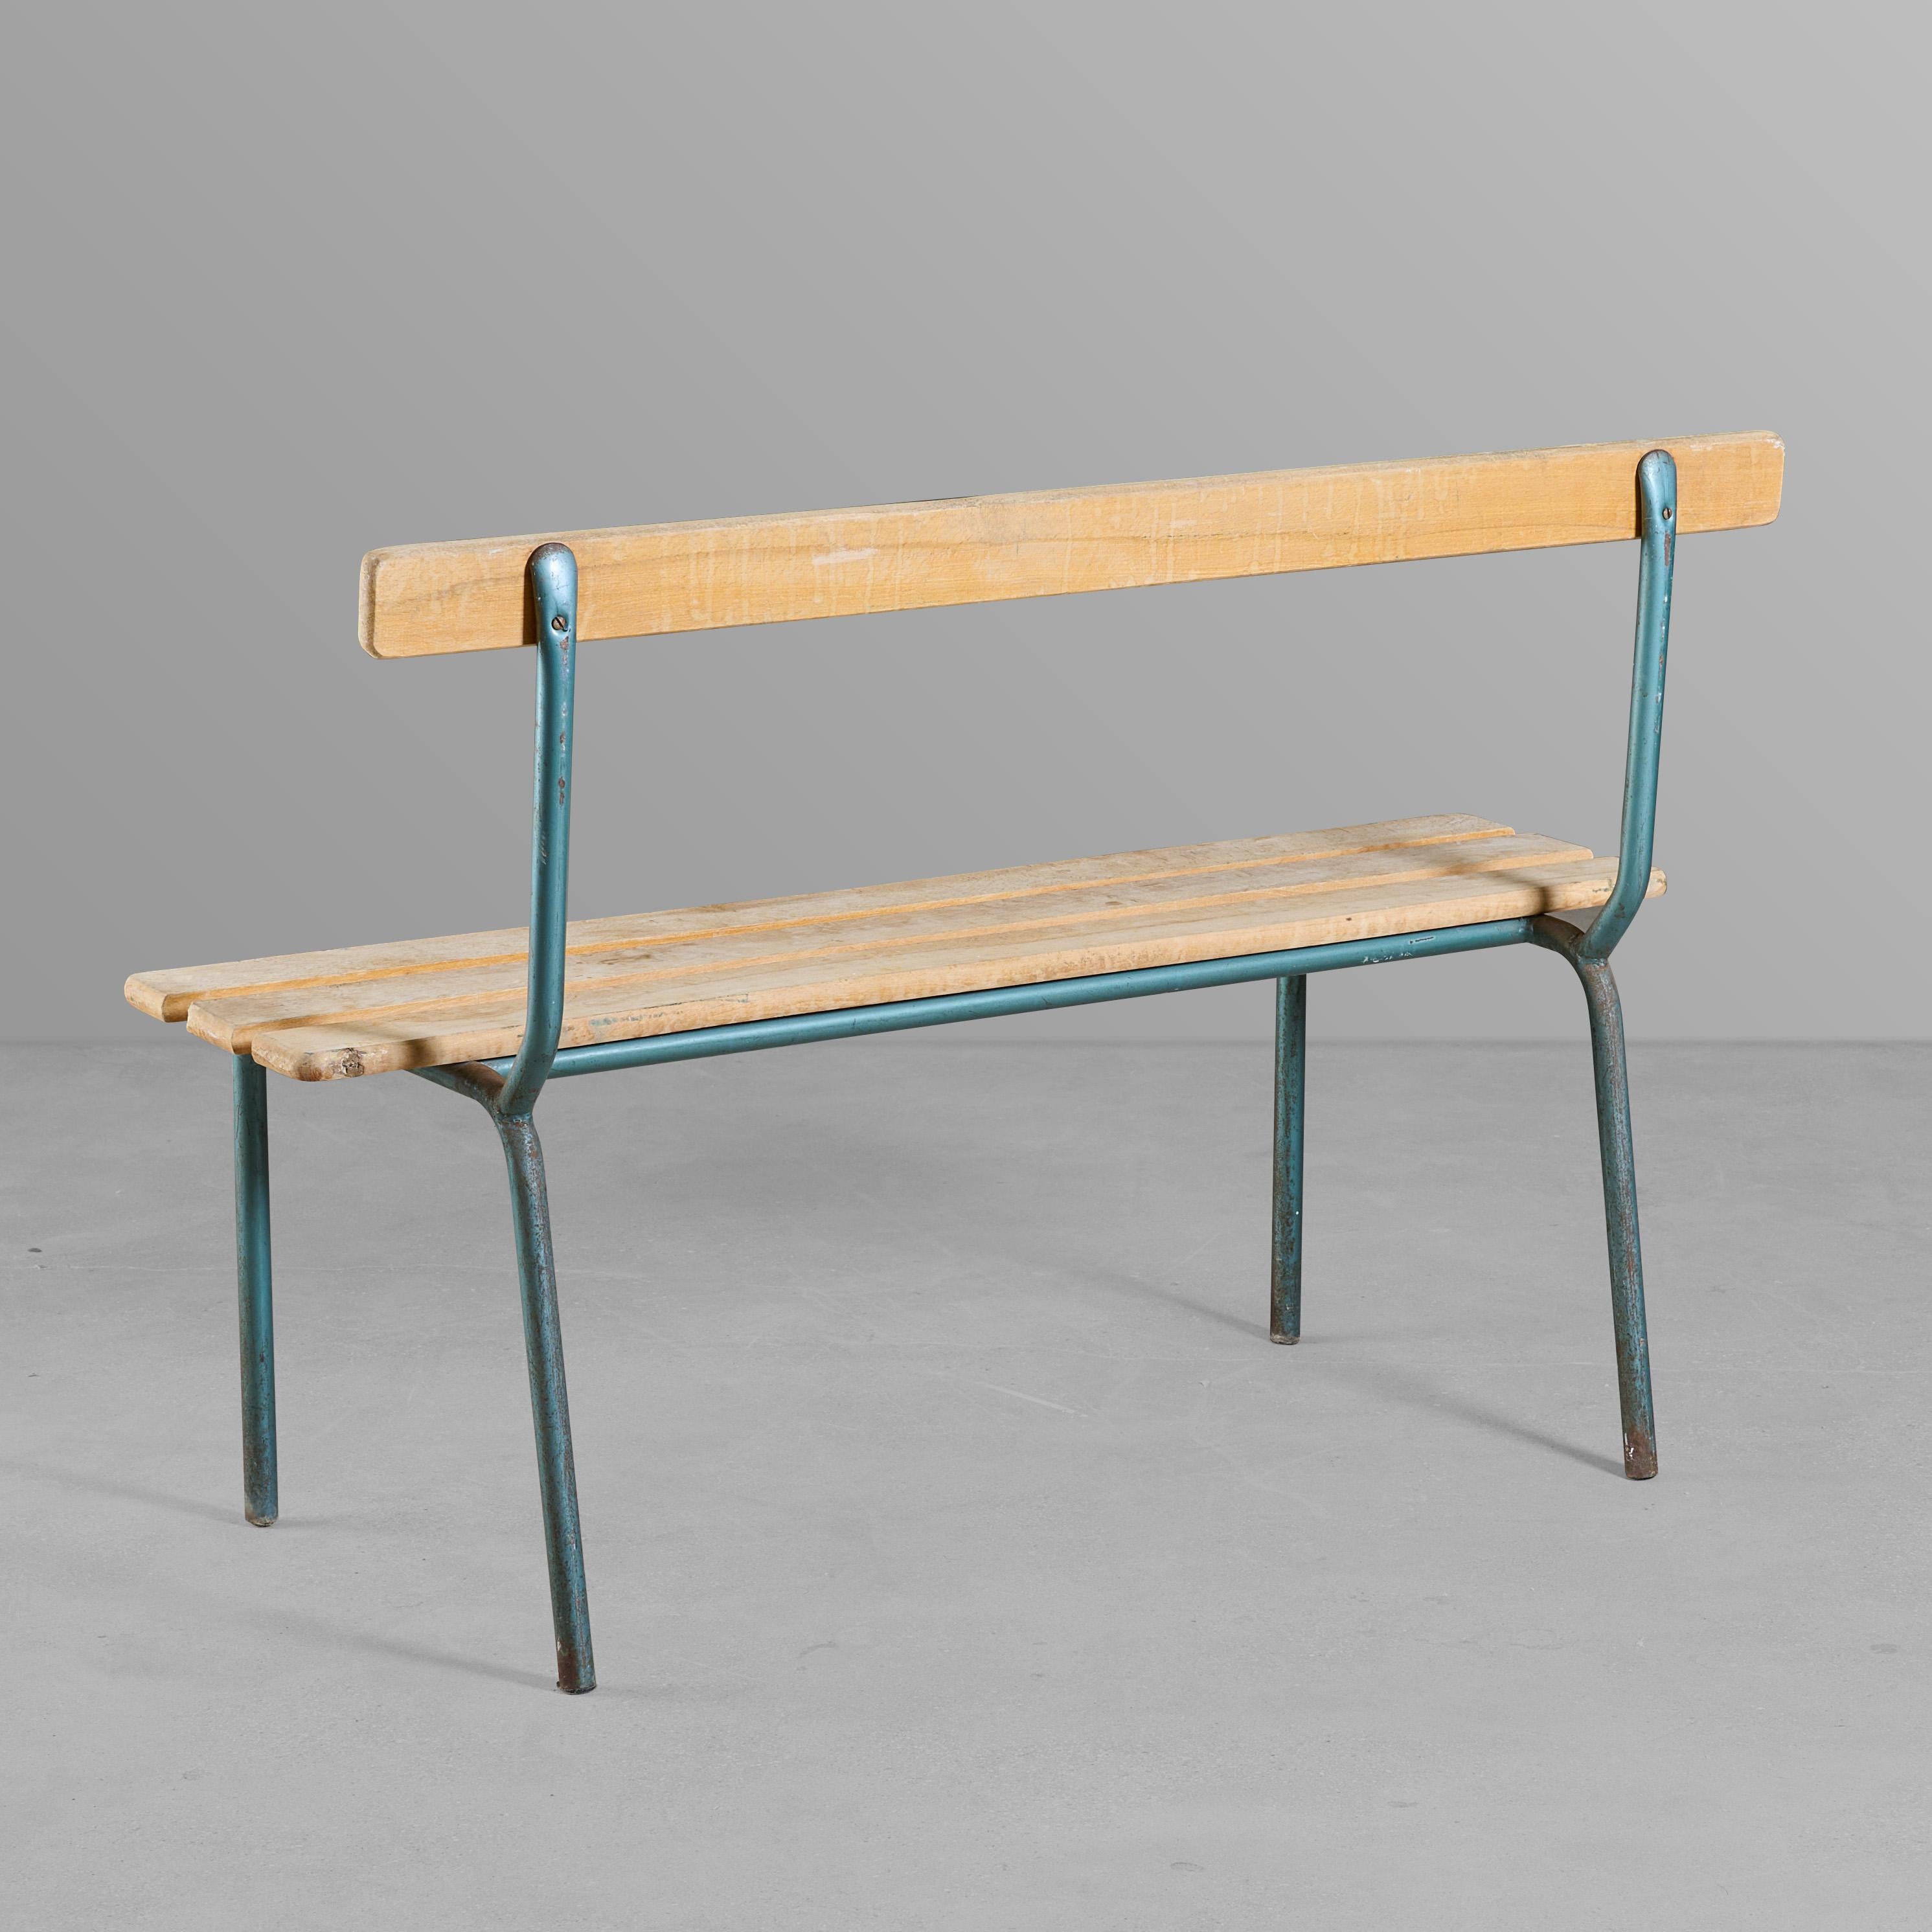 Iron and wood slat bench. For interior or exterior. Nice simple design.